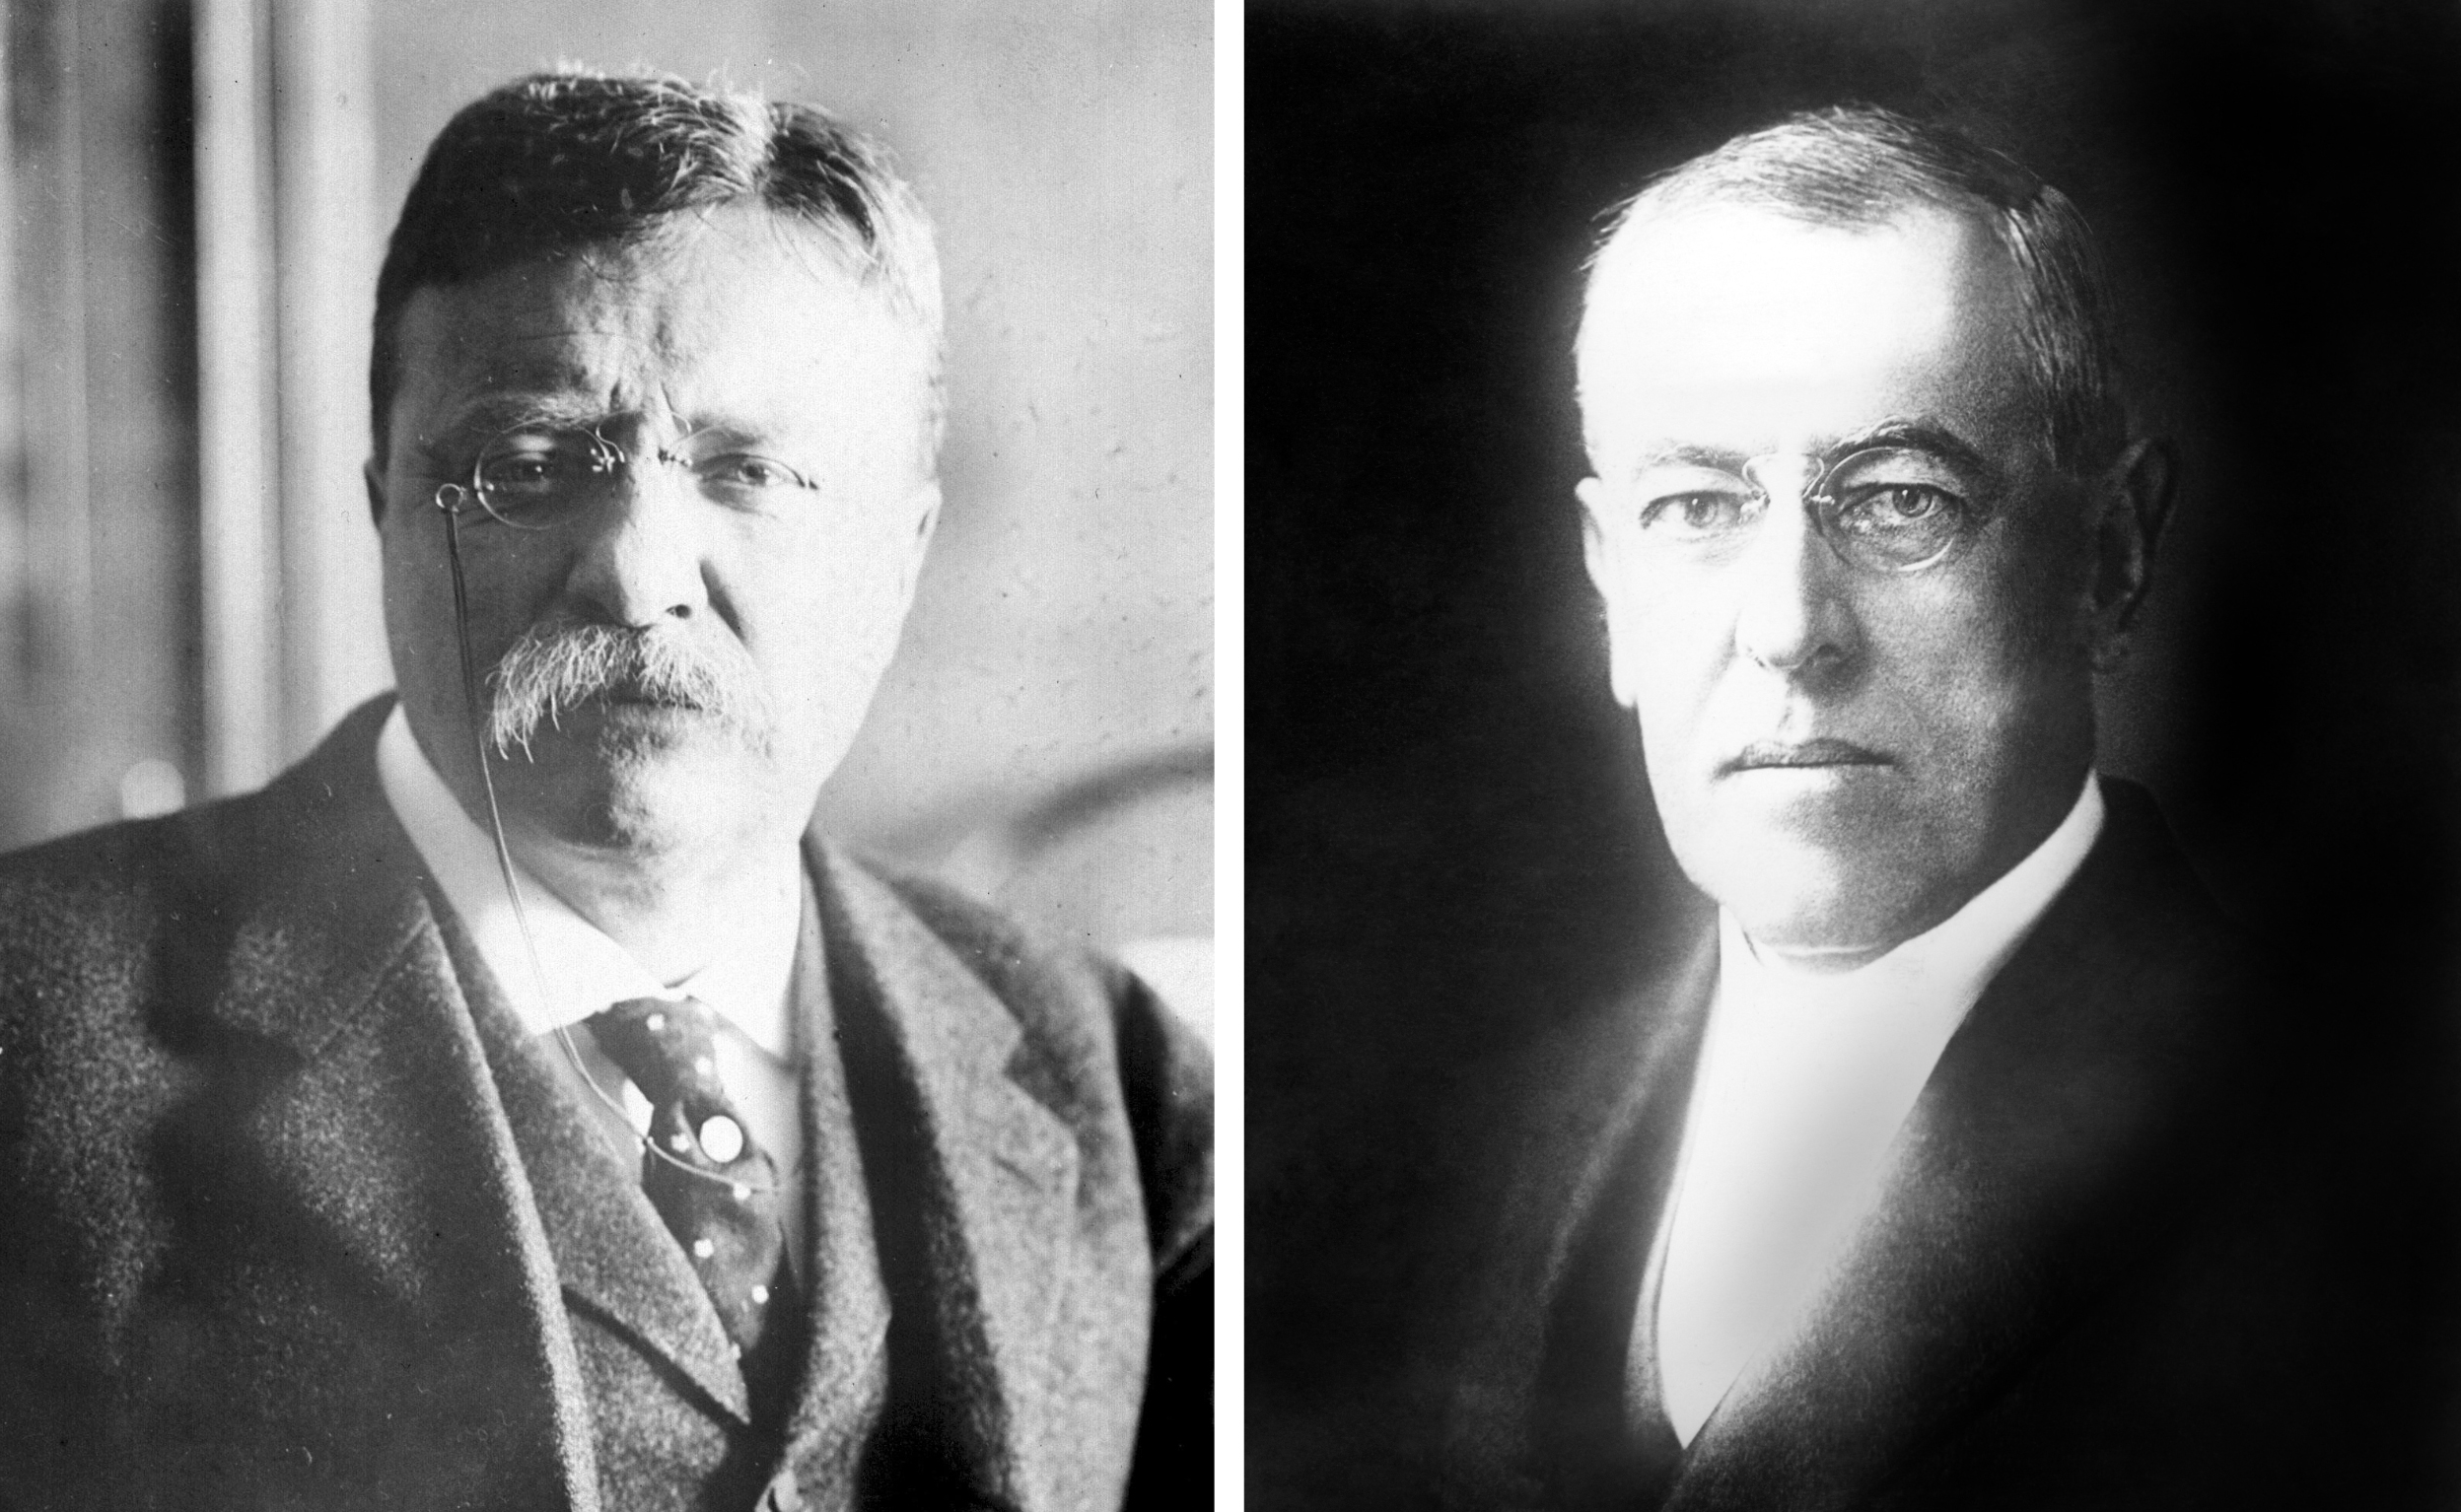 Roosevelt and Wilson